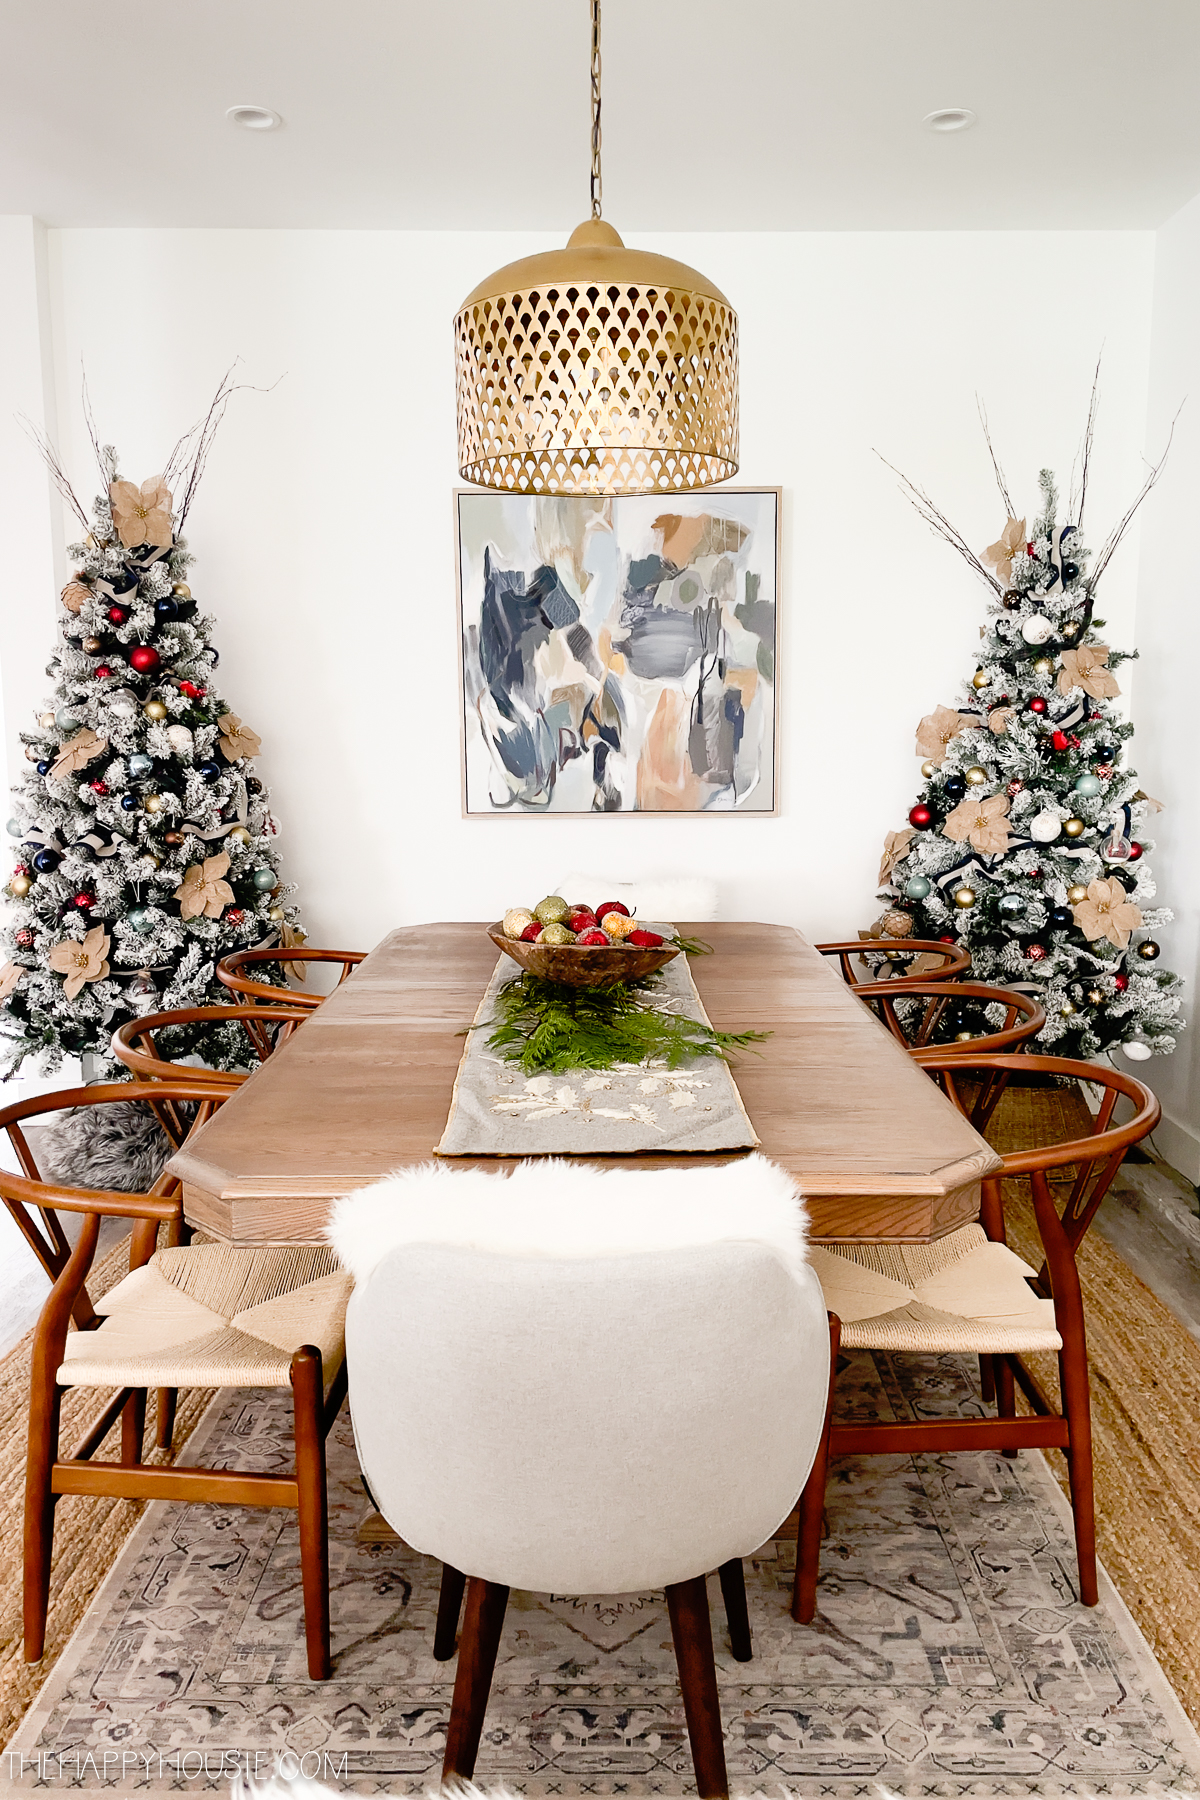 A dining room table with two Christmas trees in the corner.